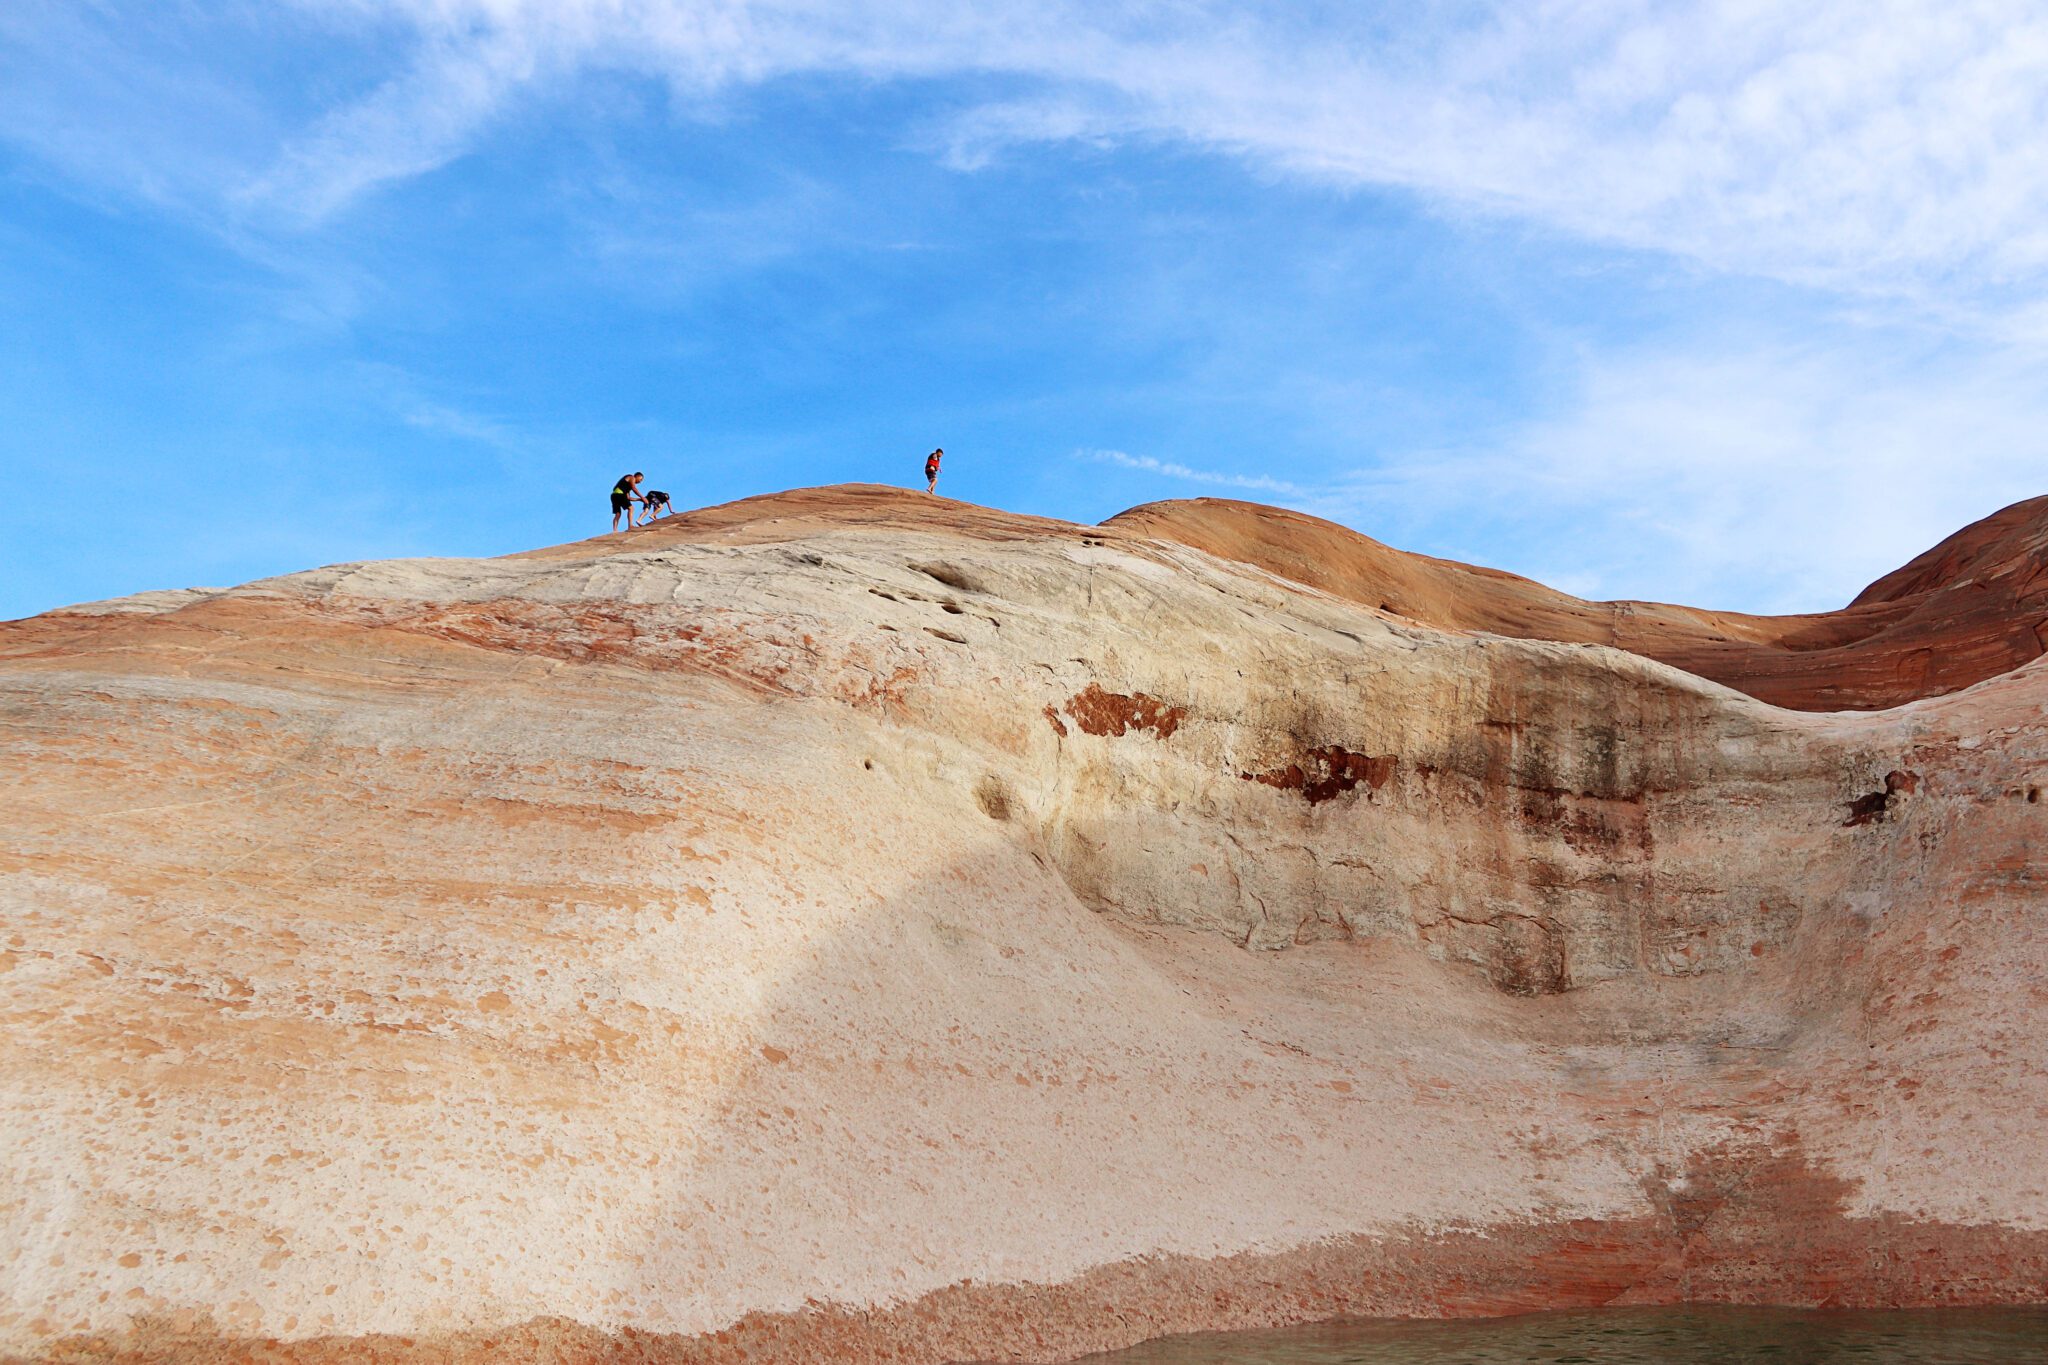 First Time Guide to Lake Powell | Hole in the Roof #lakepowell #holeintheroof #simplywander